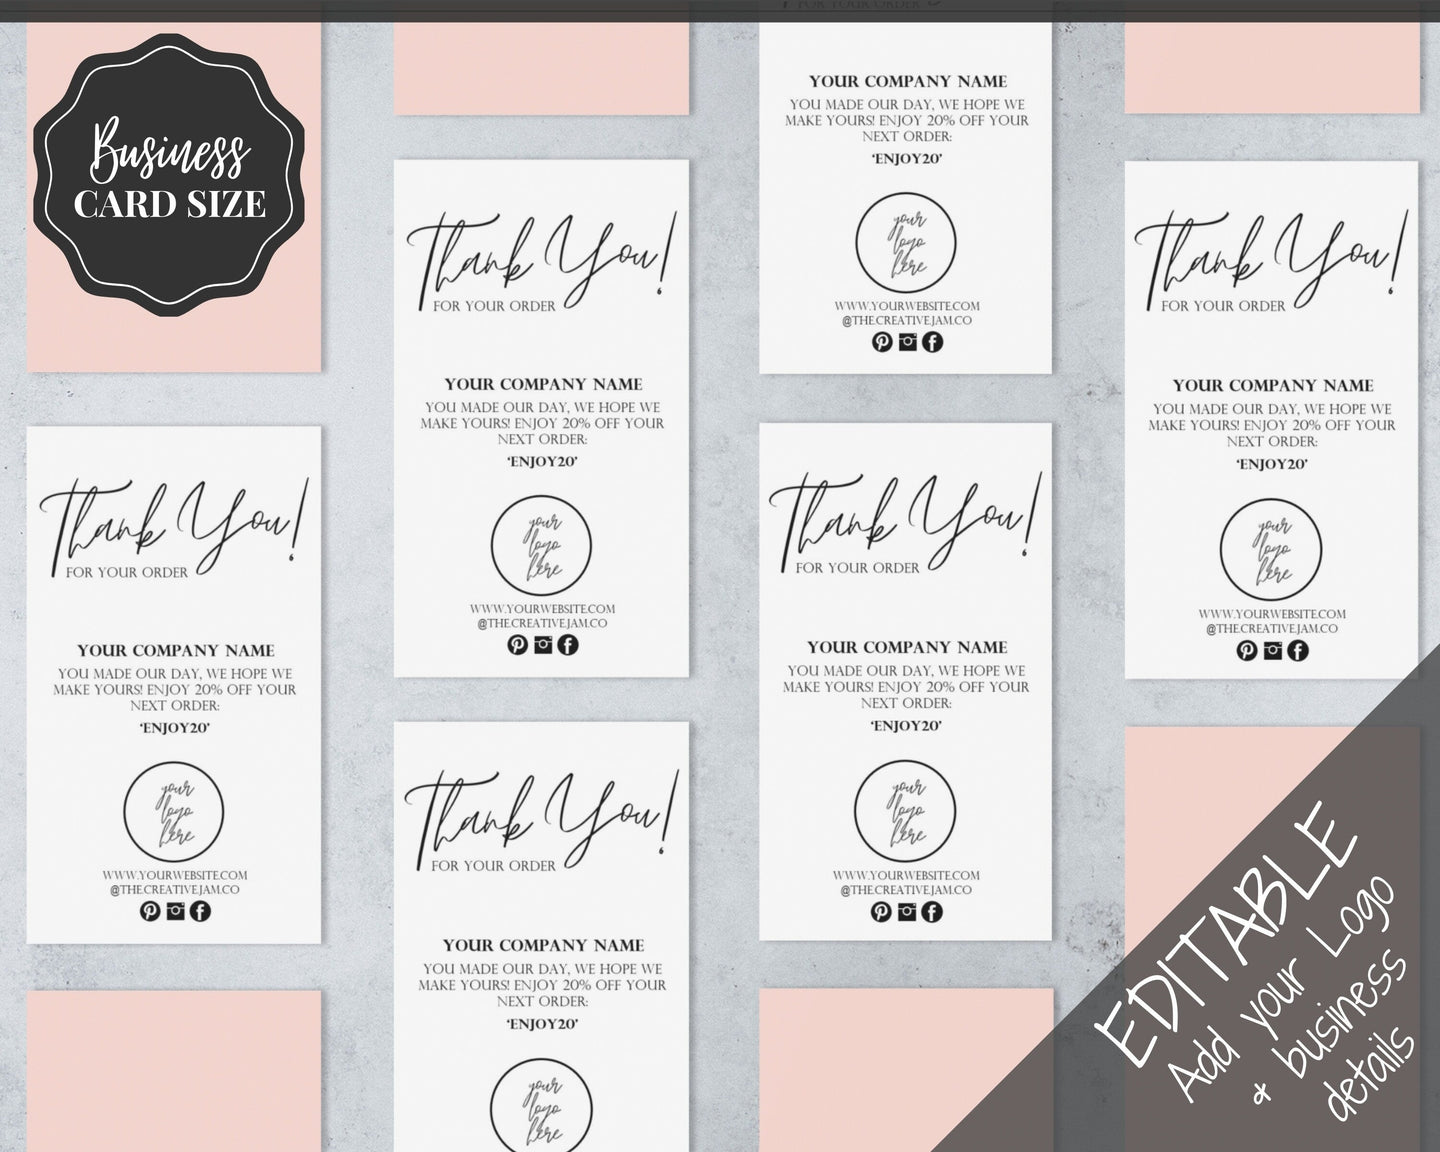 Business Thank You For Your Order Insert Card Template. EDITABLE Parcel Insert, Etsy Order, Small Business card, Thank you, your Purchase | Watercolor & Monochrome